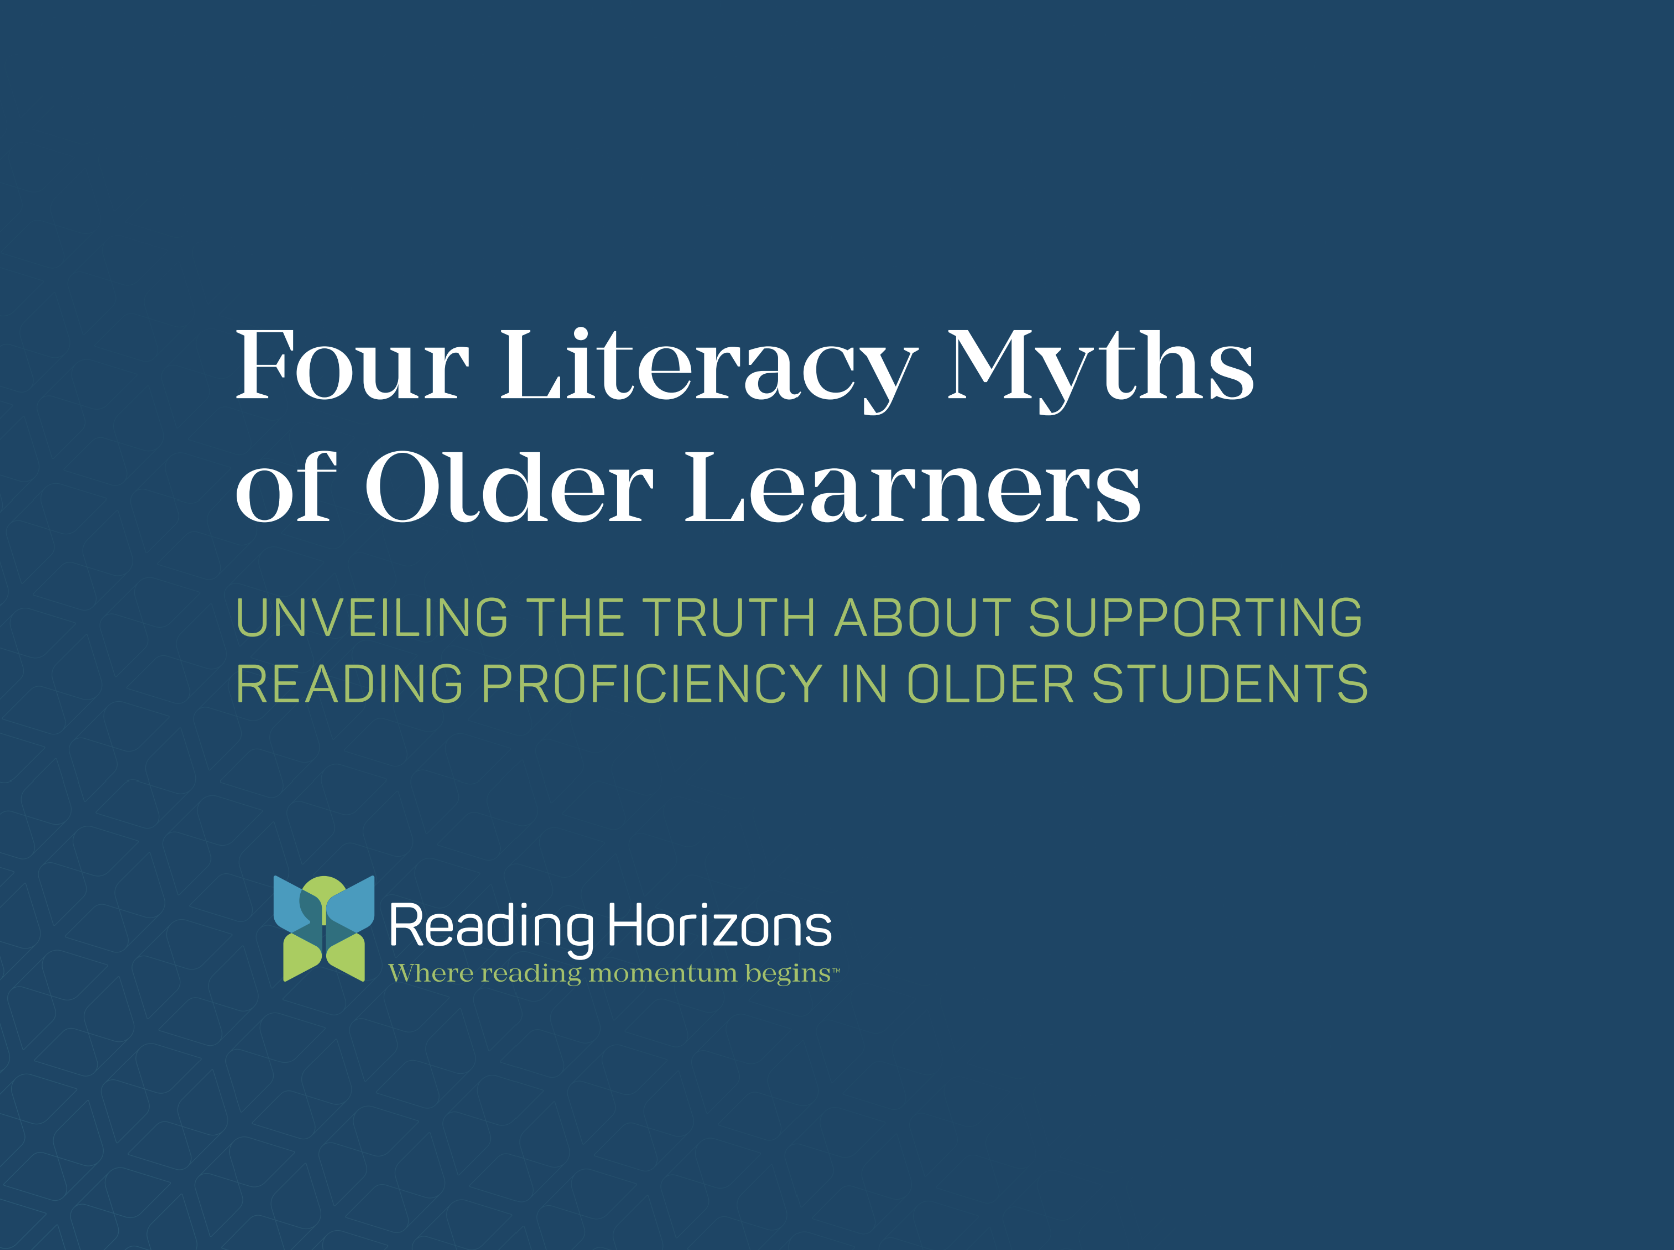 Four Literacy Myths of Older Learners